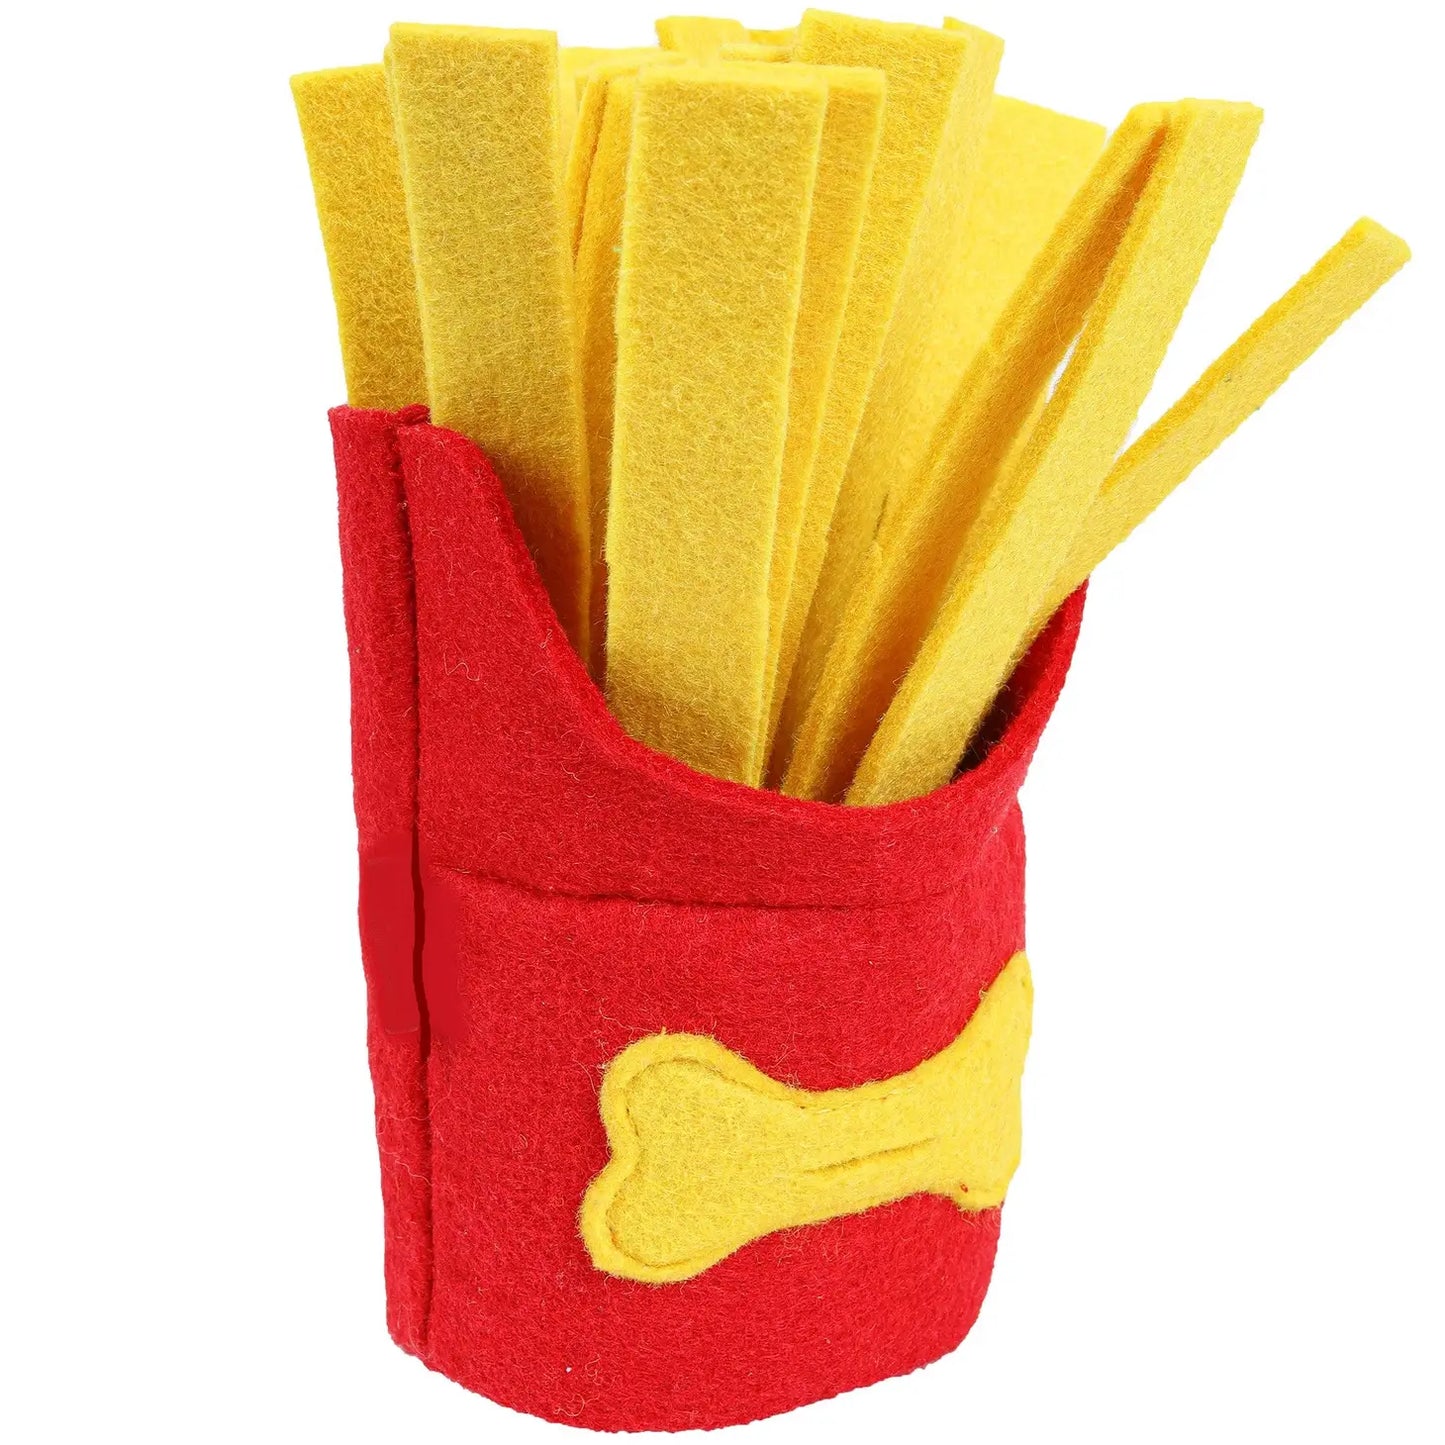 felt toy made to look like french fries